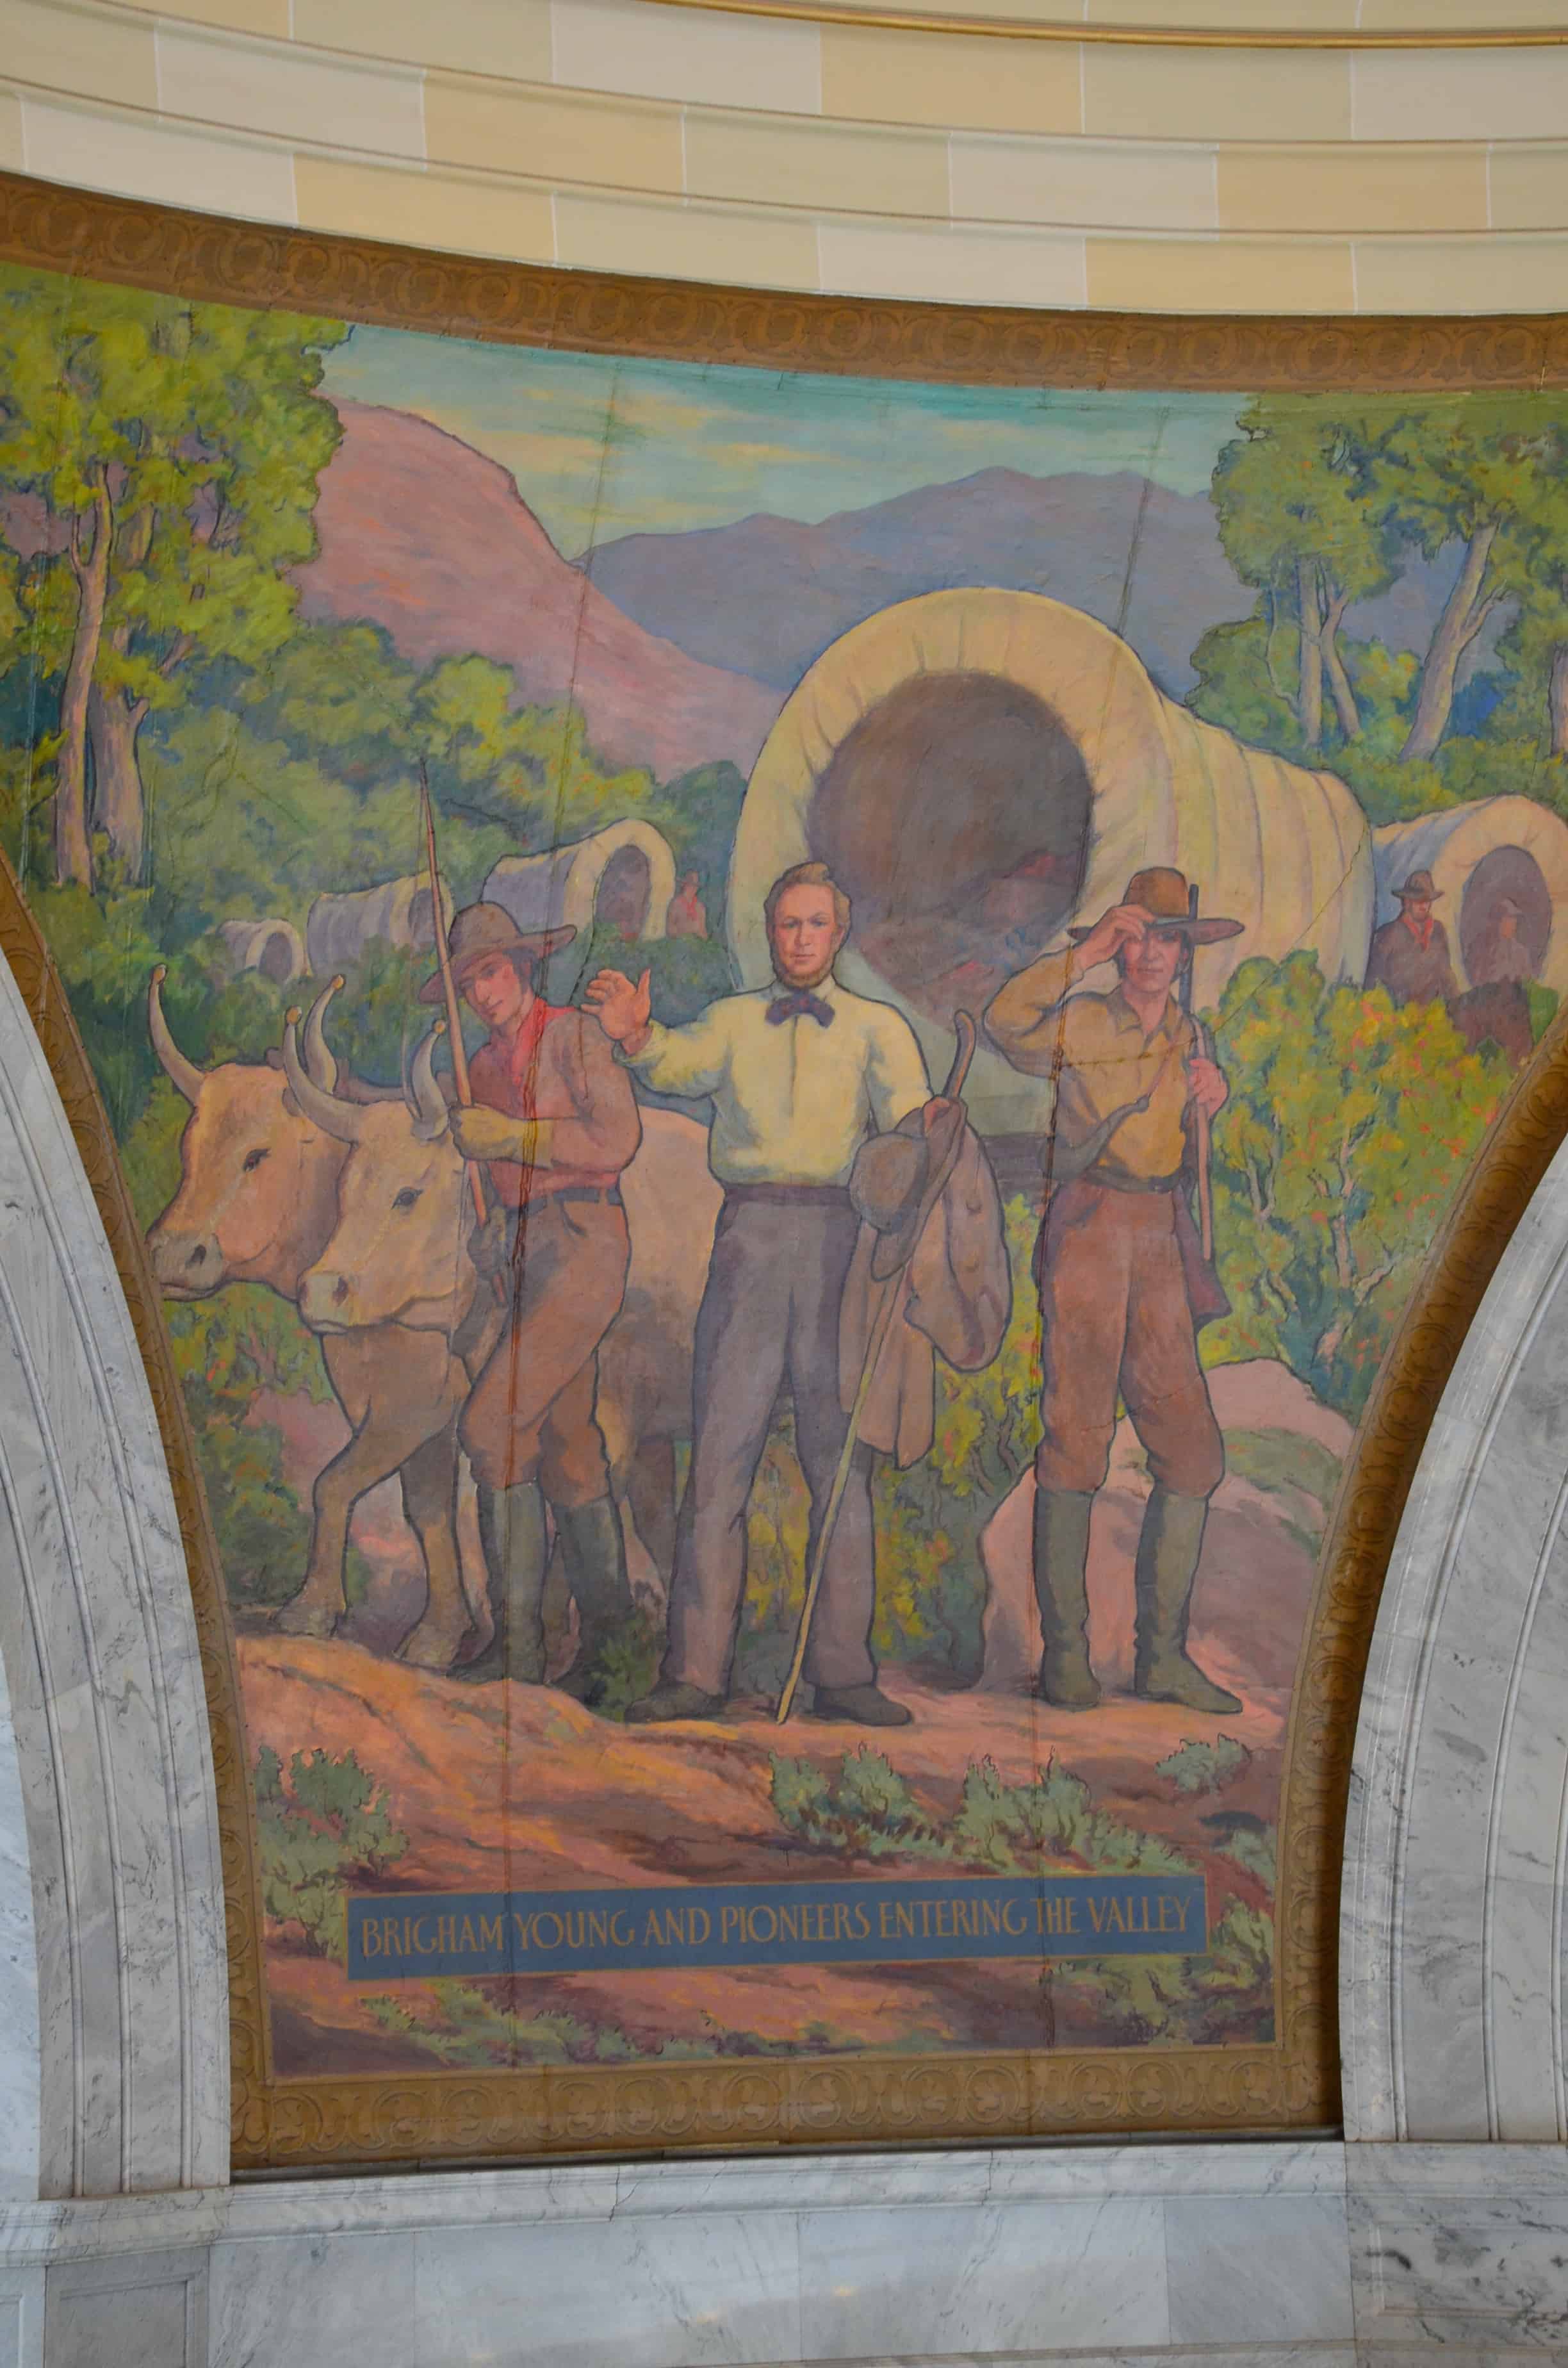 Brigham Young and Pioneers Entering the Valley, by Lee Greene Richards (1934) at the Utah State Capitol in Salt Lake City